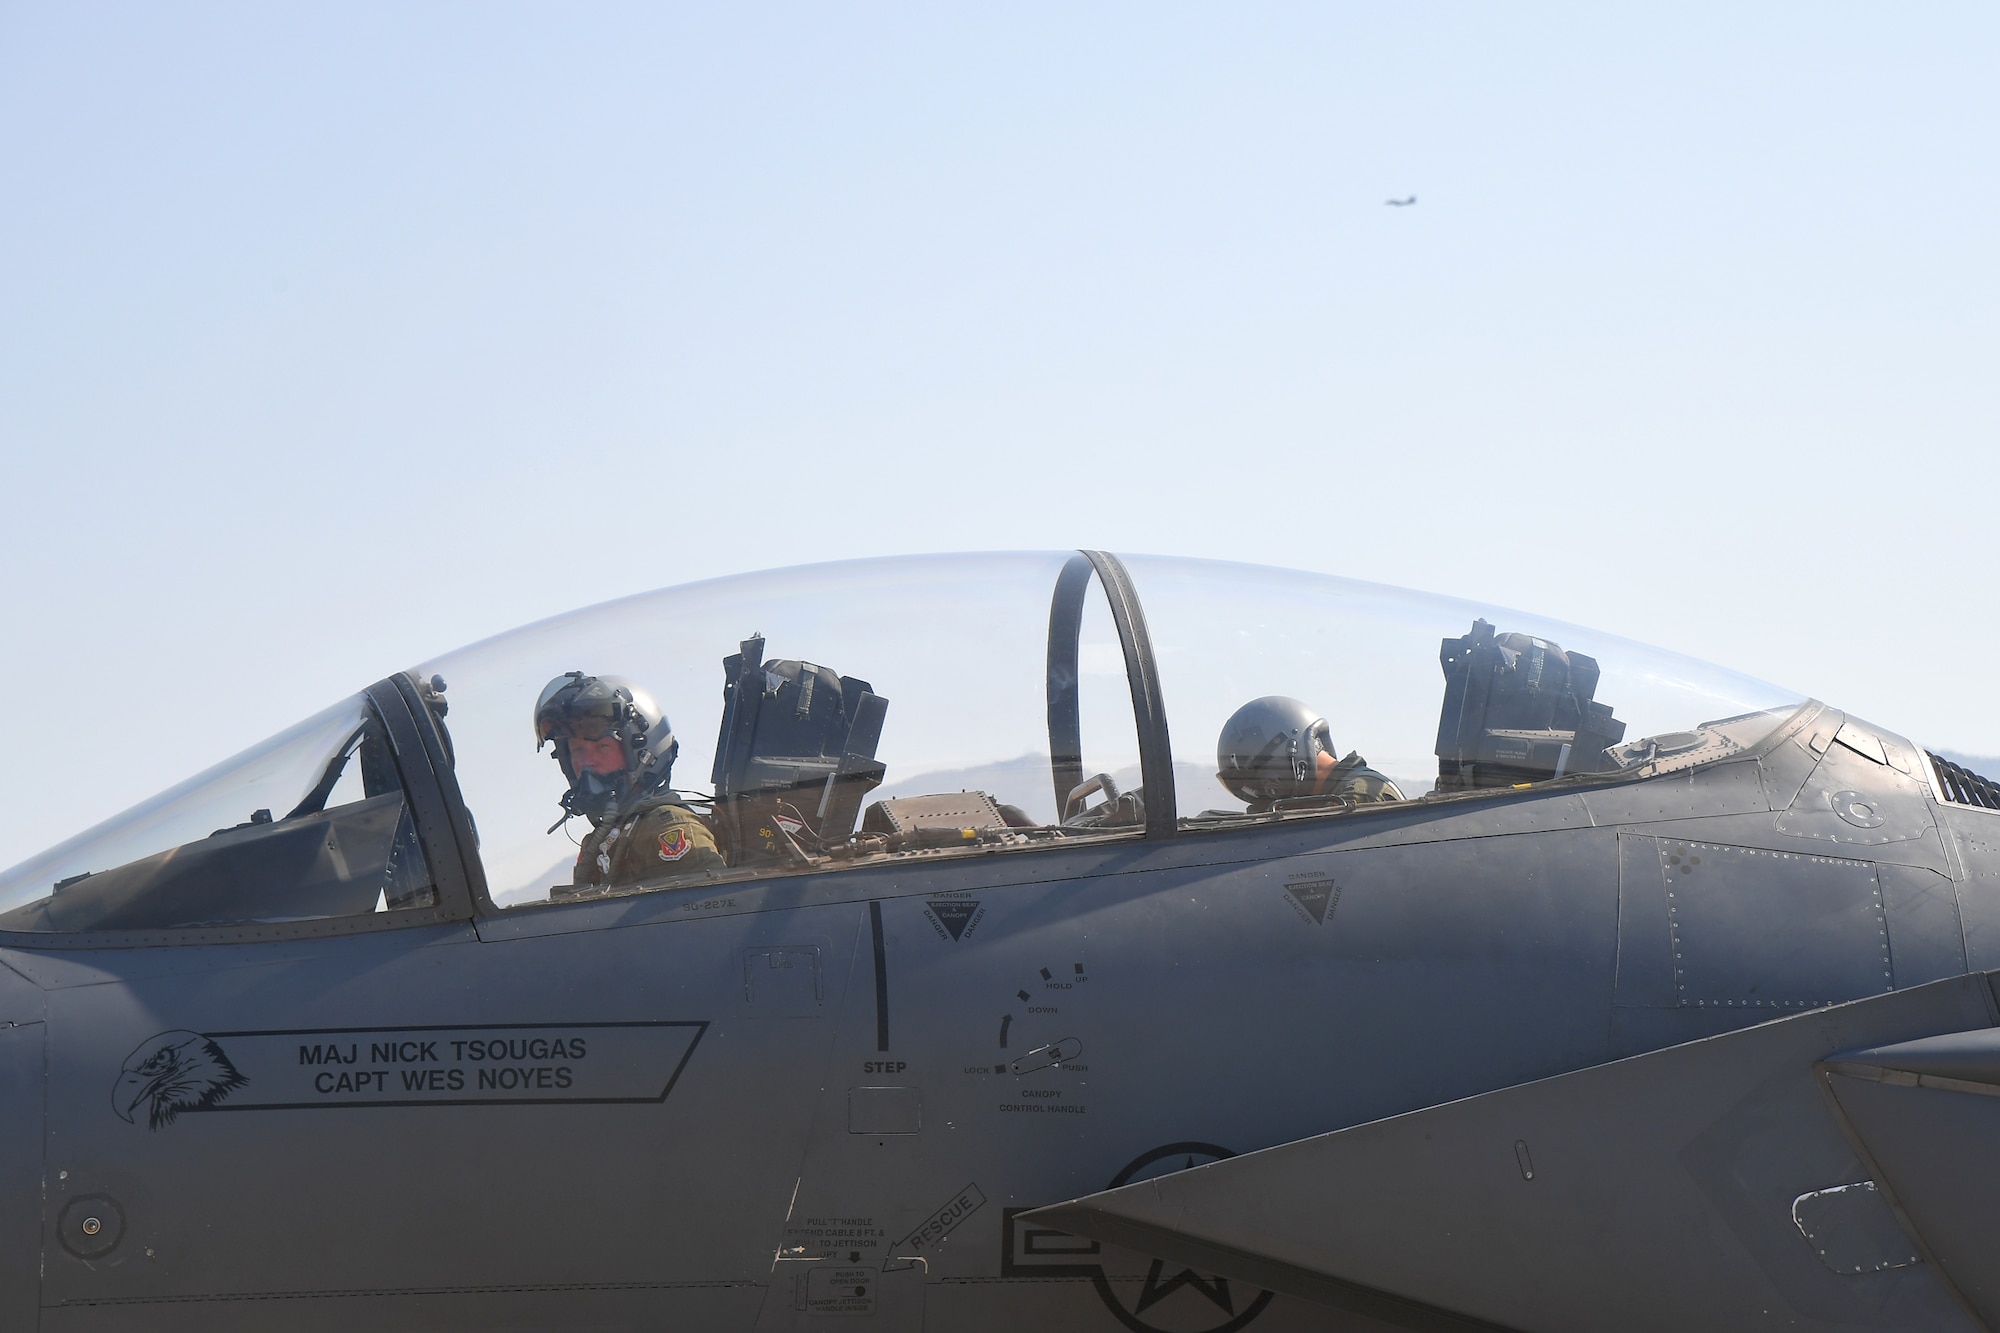 Maj. Nick Tsougas and Capt. Wes Noyes, 389th Fighter Squadron, return training mission Aug. 15, 2018, at Hill Air Force Base, Utah. F-15E Strike Eagles and Airmen from the 389th FS at Mountain Home AFB, Idaho, were at Hill AFB to participate in the Air Force’s Weapons System Evaluation Program known as Combat Hammer. (U.S. Air Force photo by Todd Cromar)